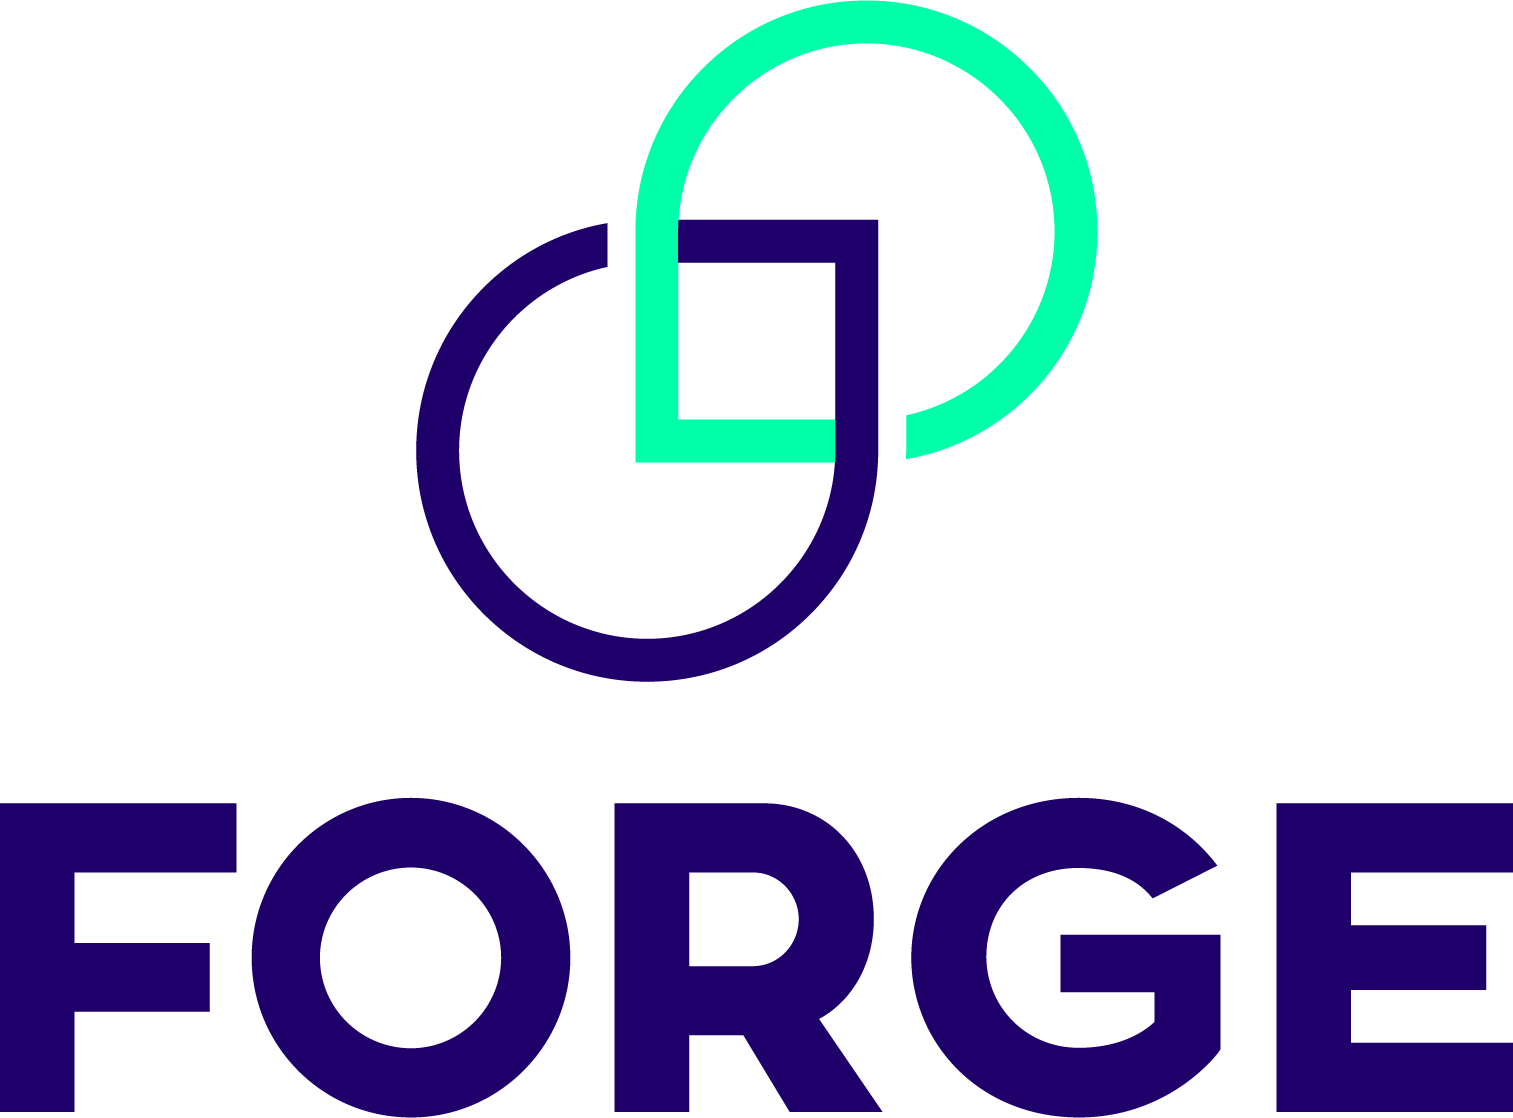 FORGE logo (1).png